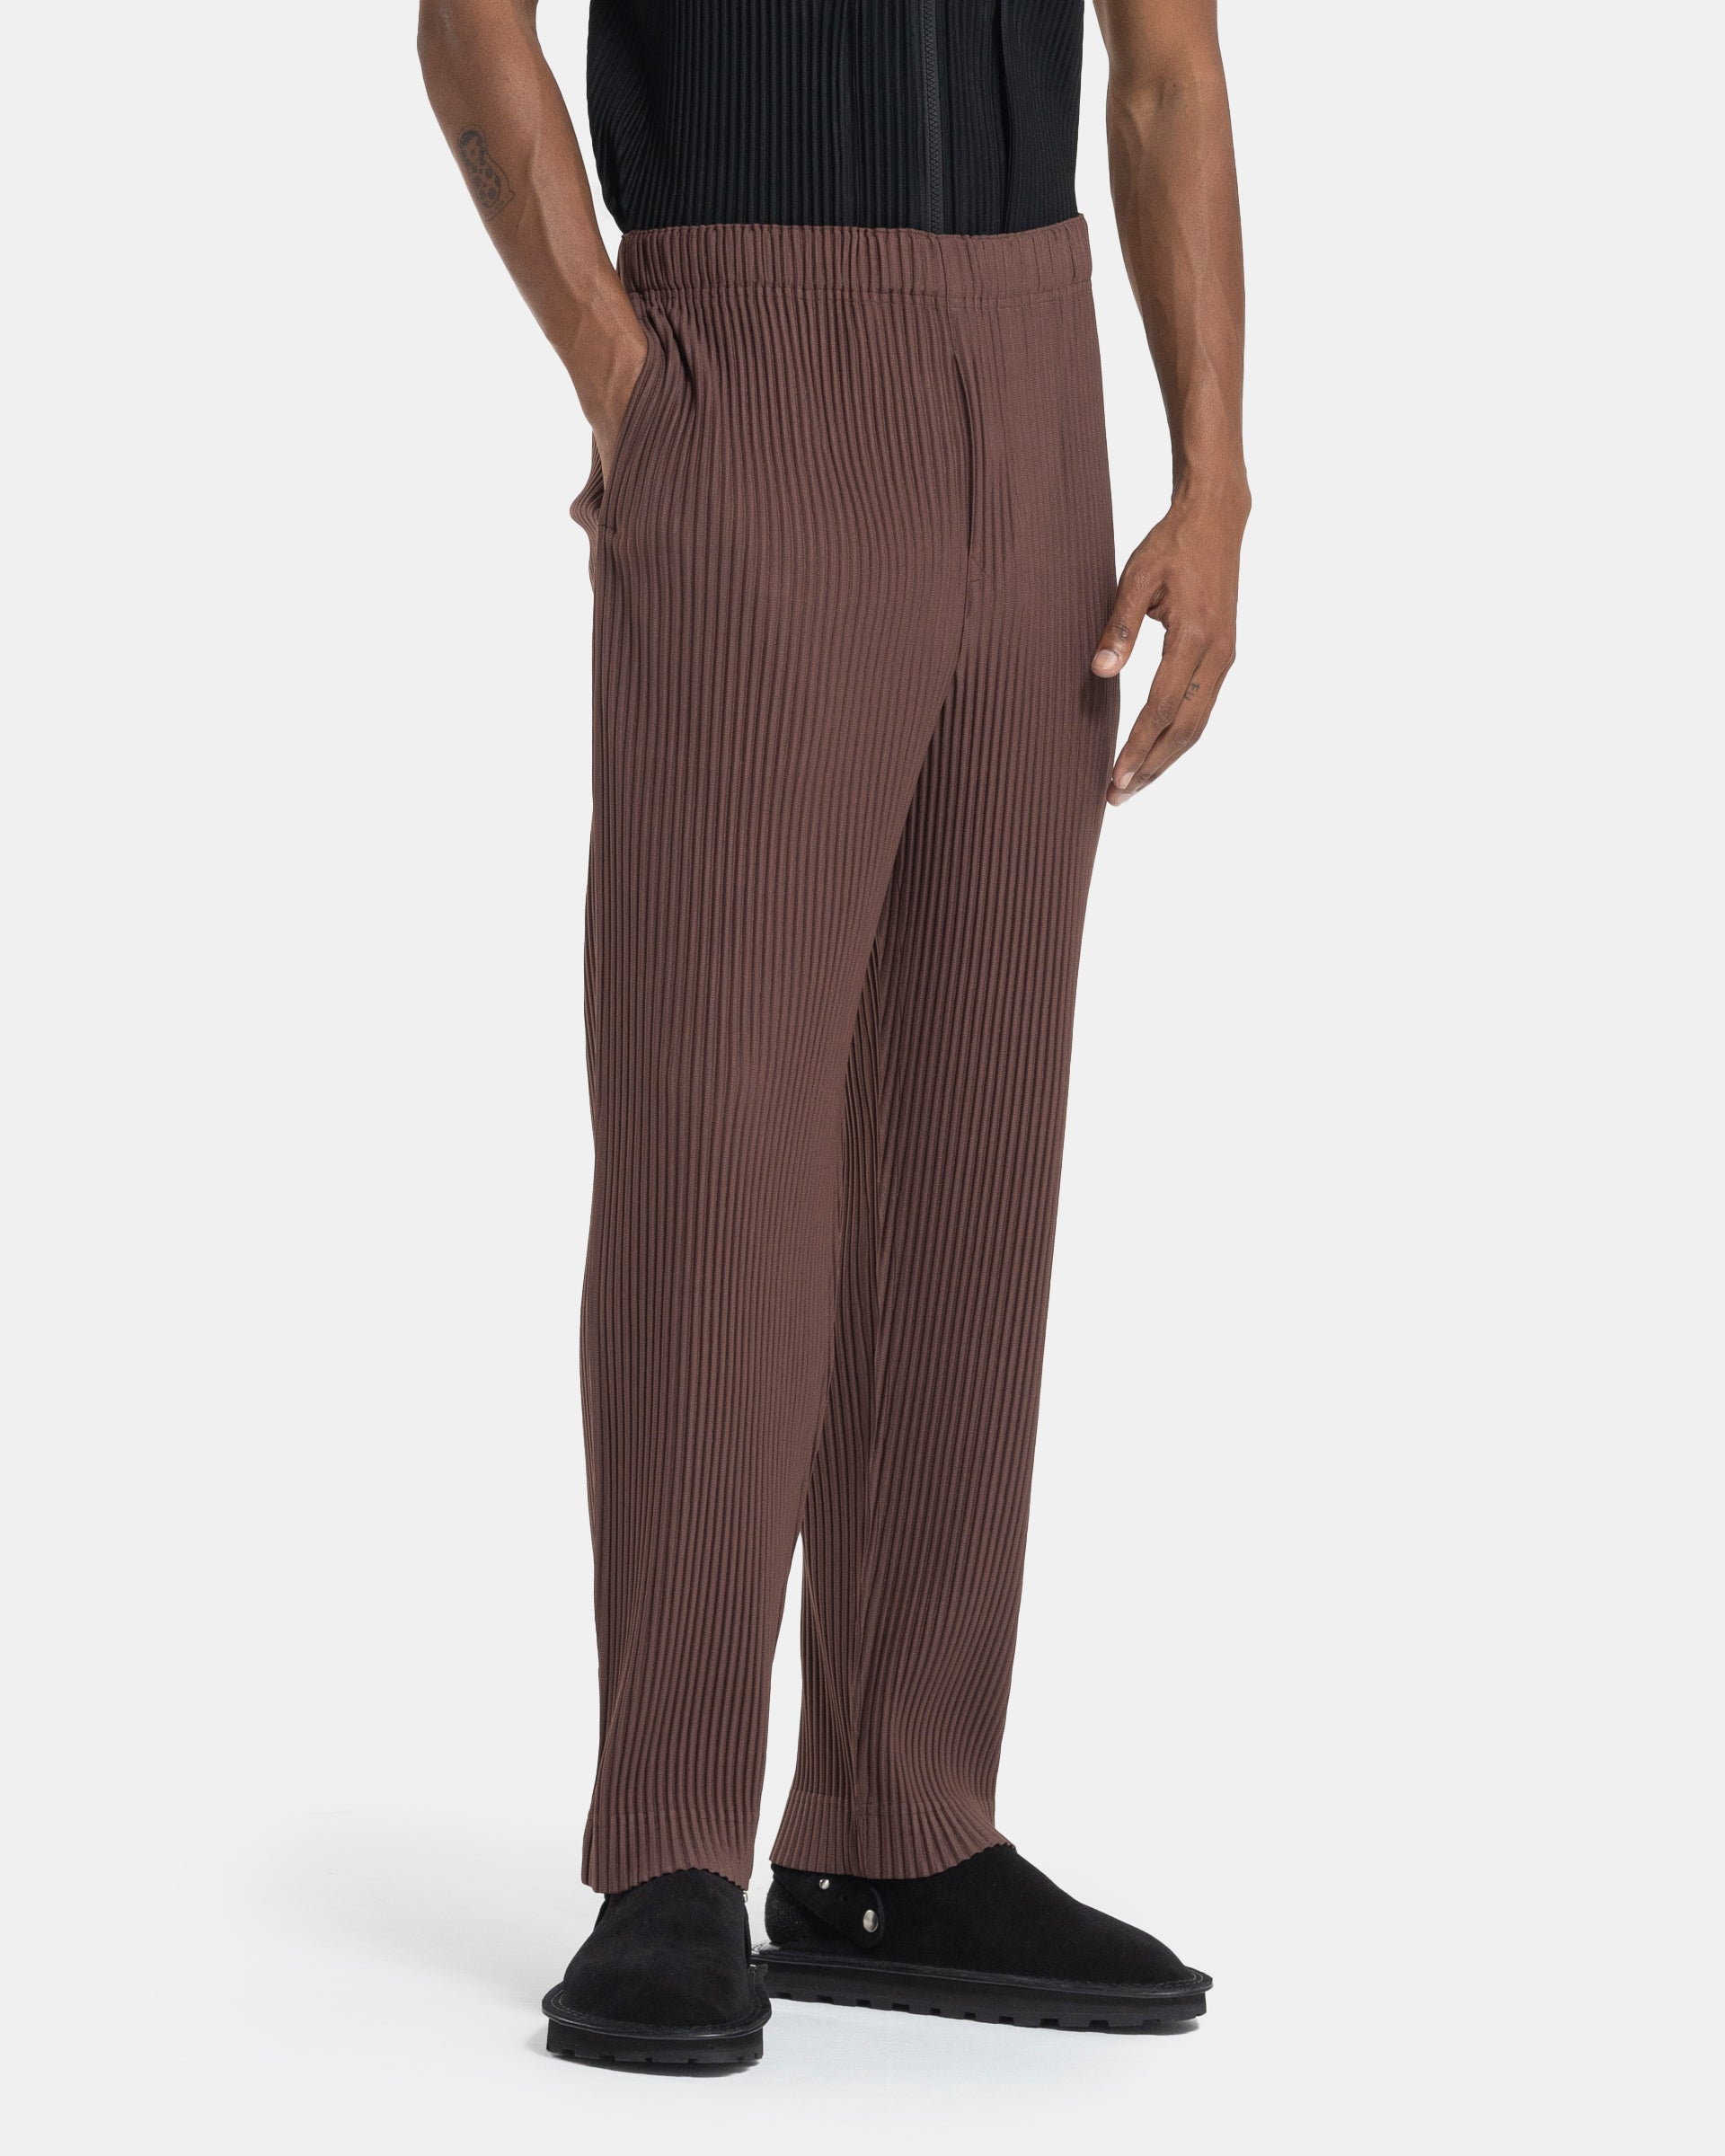 MC September Pants in Cocoa Brown